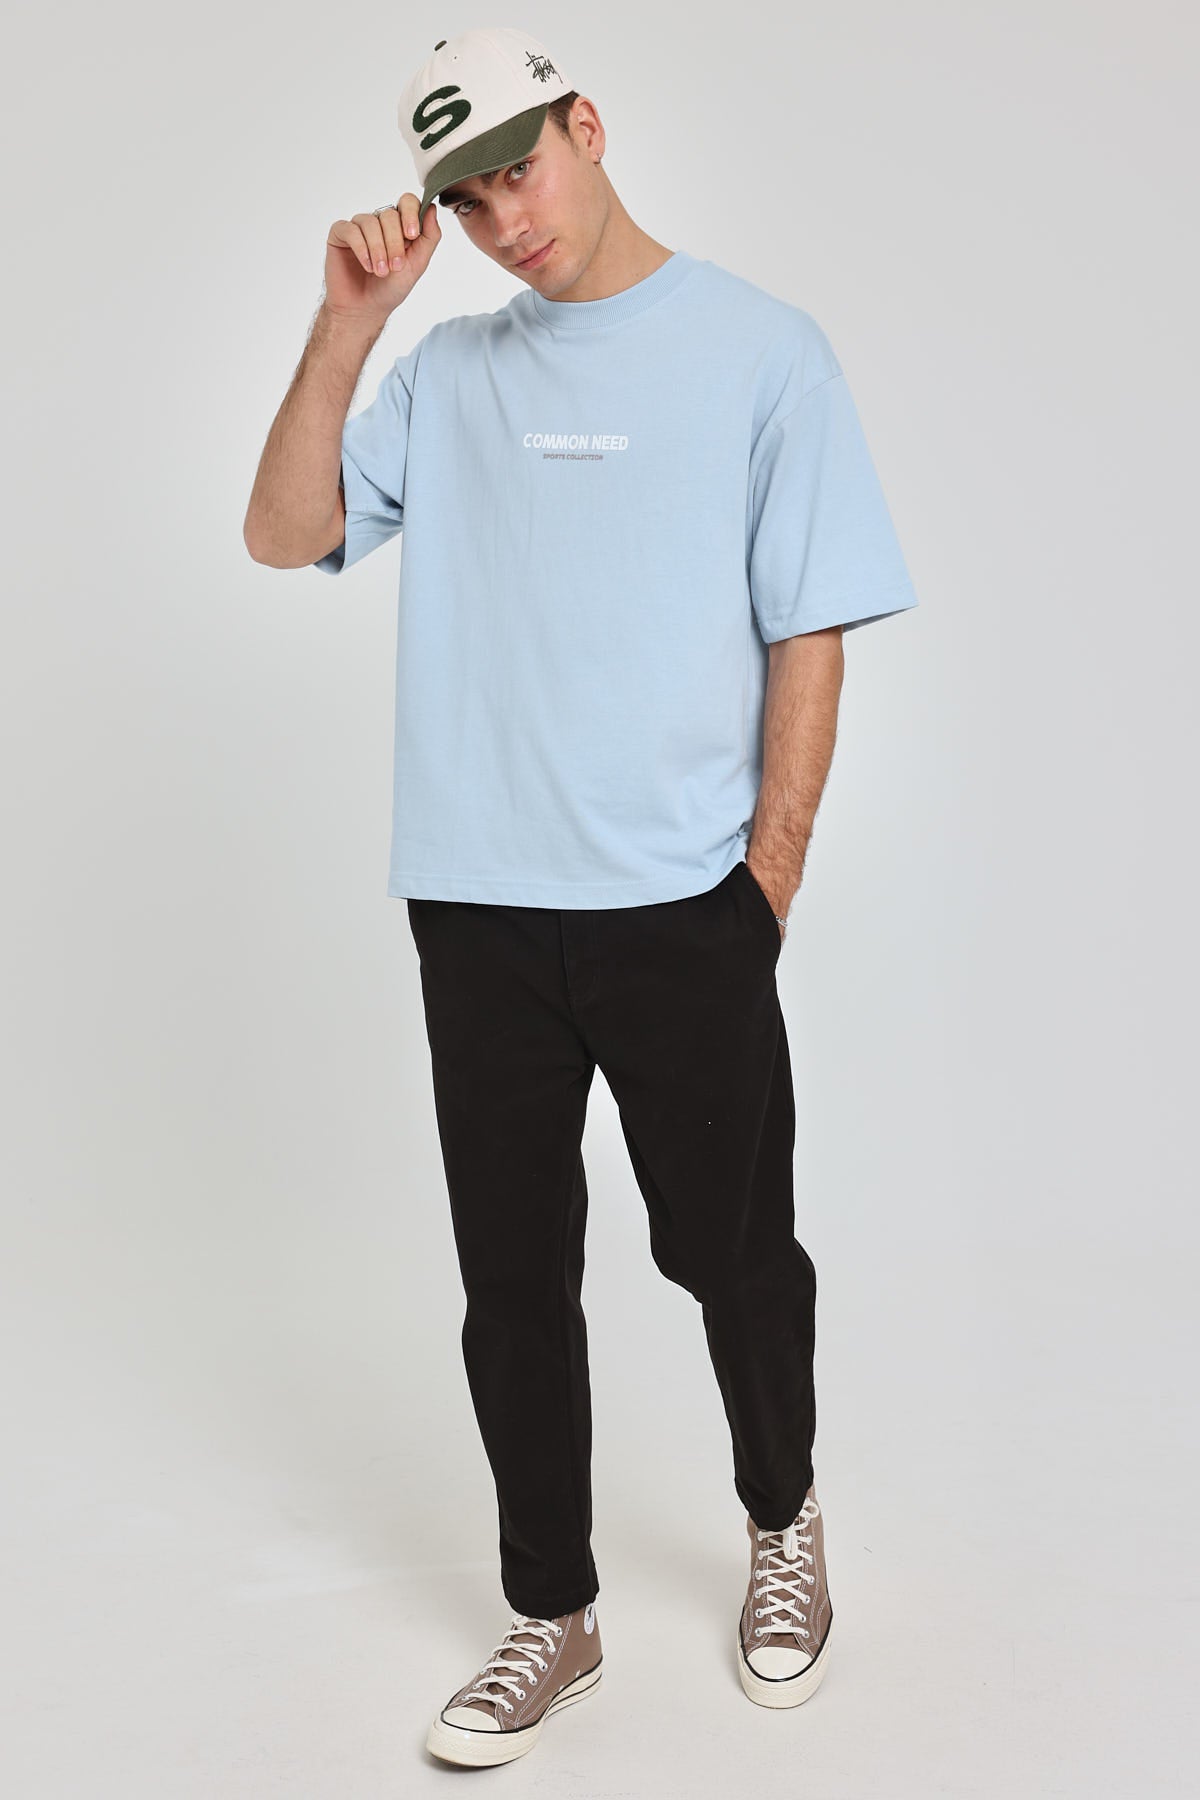 Common Need Resilient Easy Tee Ice Blue – Universal Store